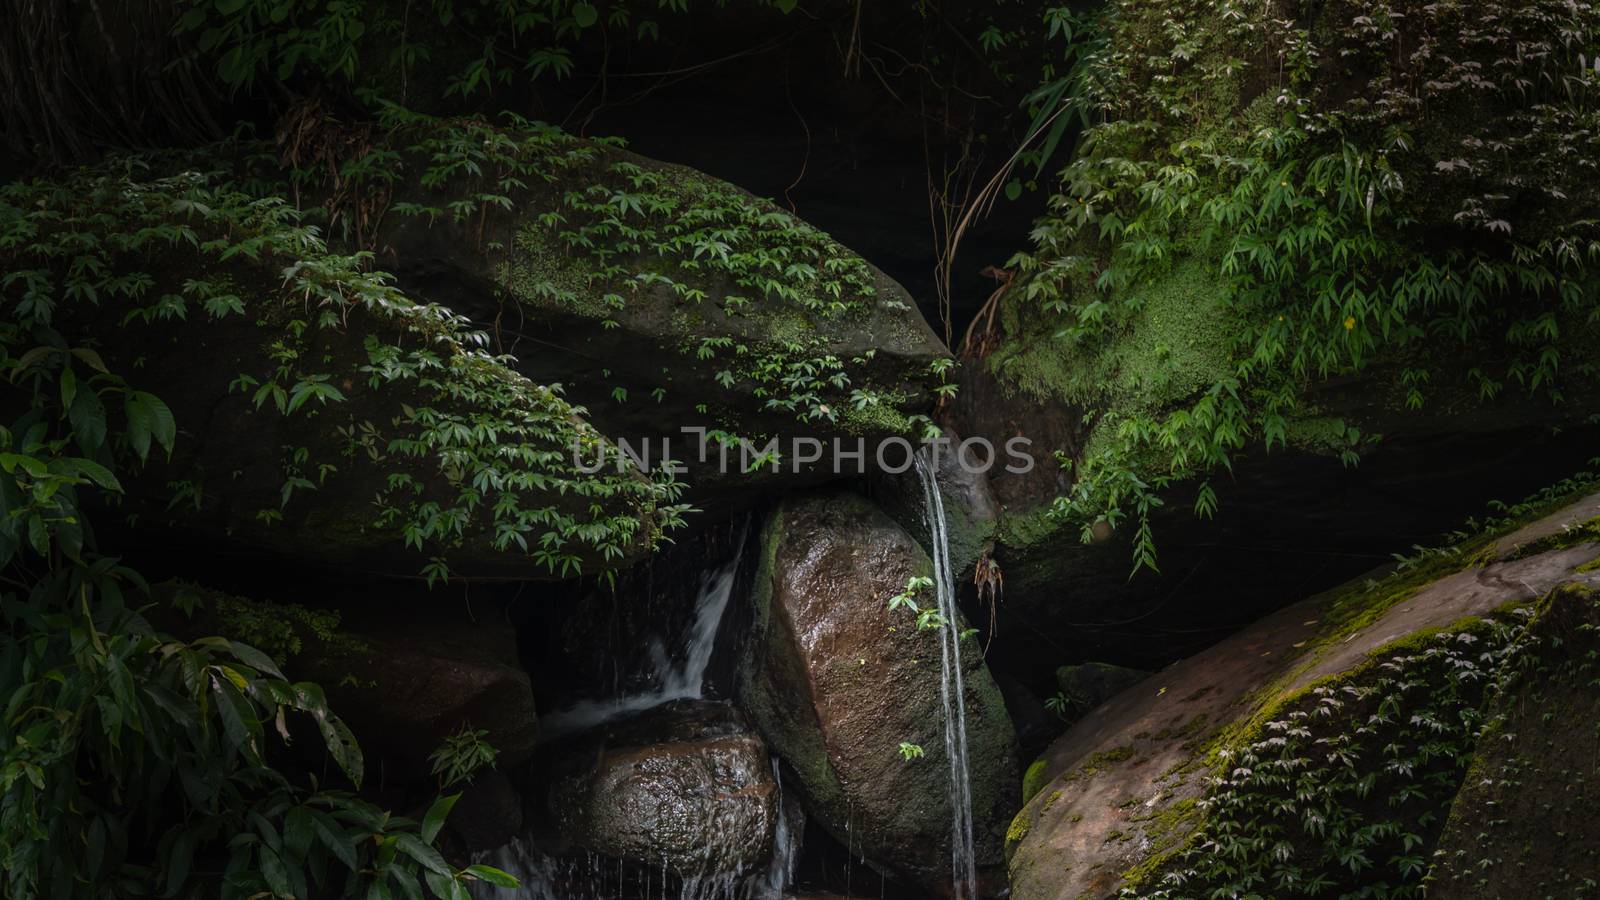 Stream in the tropical forest . Cascade falls over mossy rocks